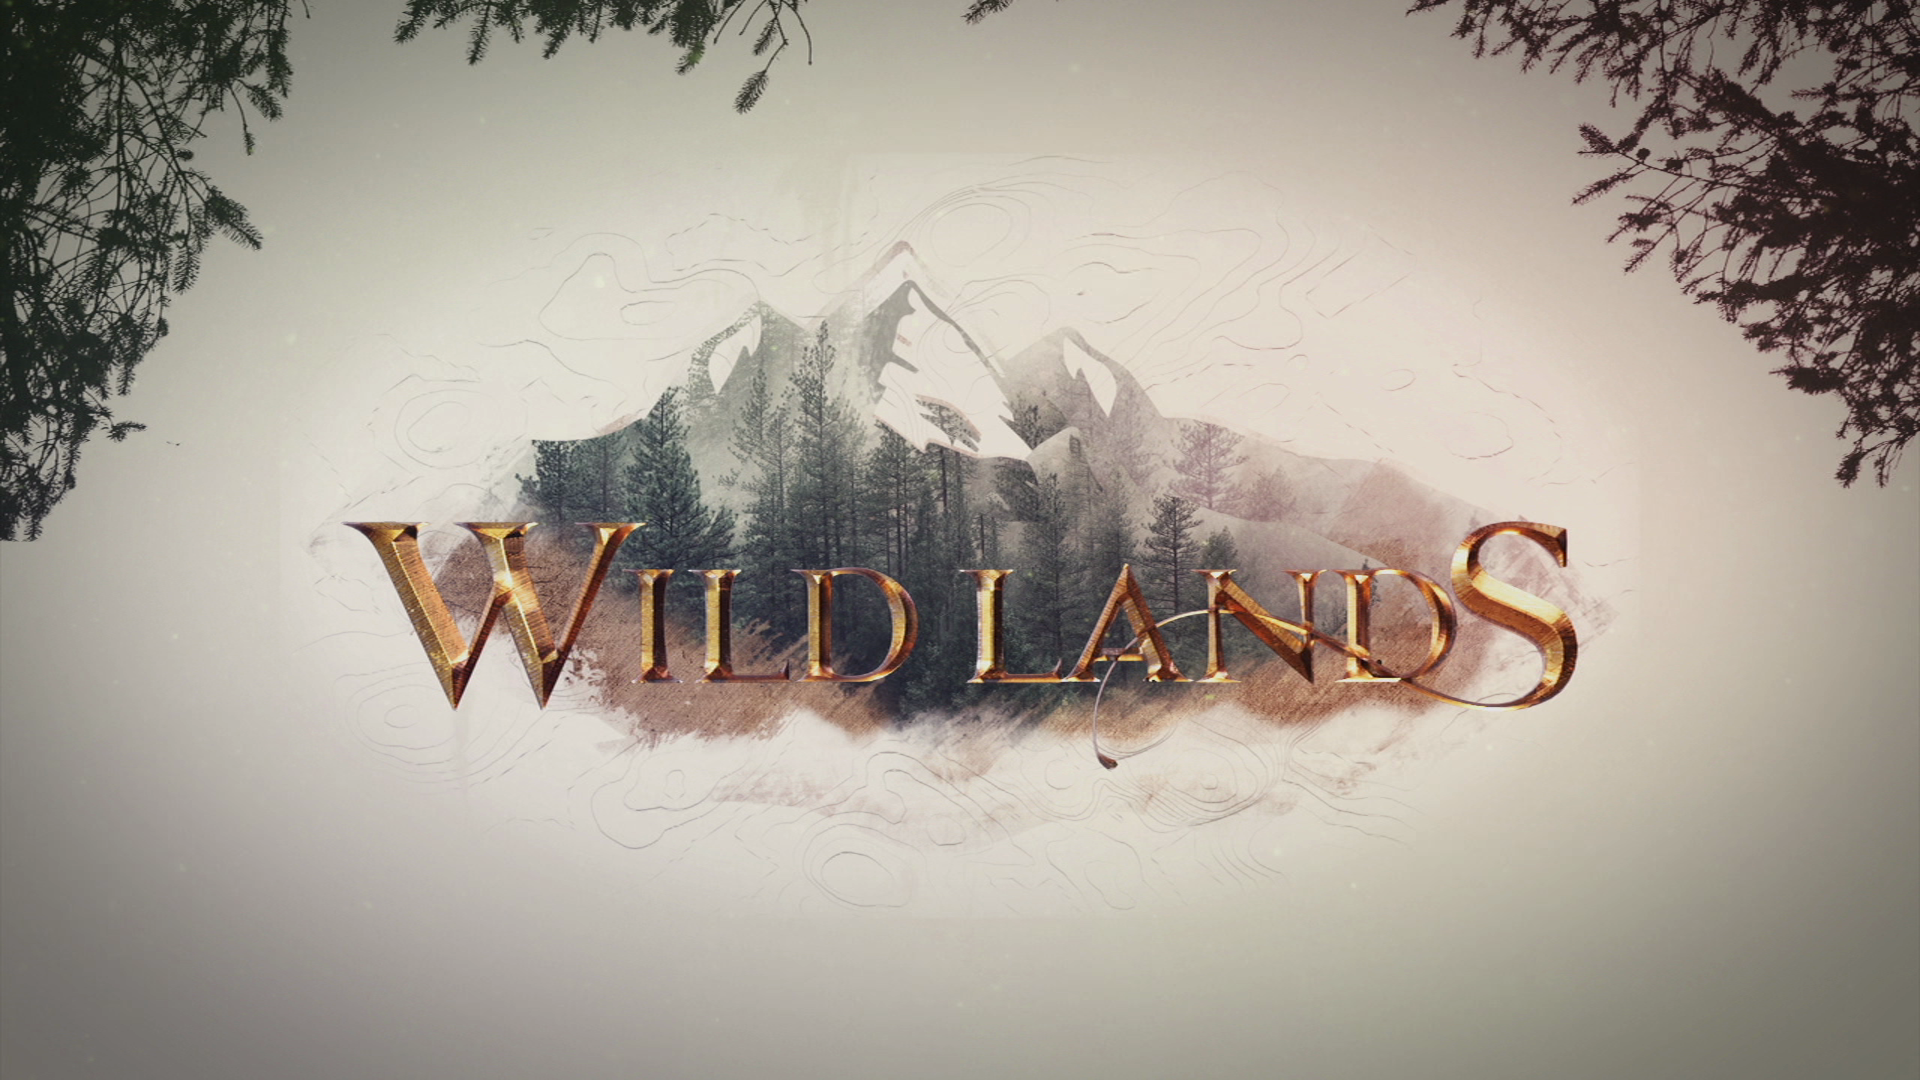 TNC brings back the heat with WILD LANDS return